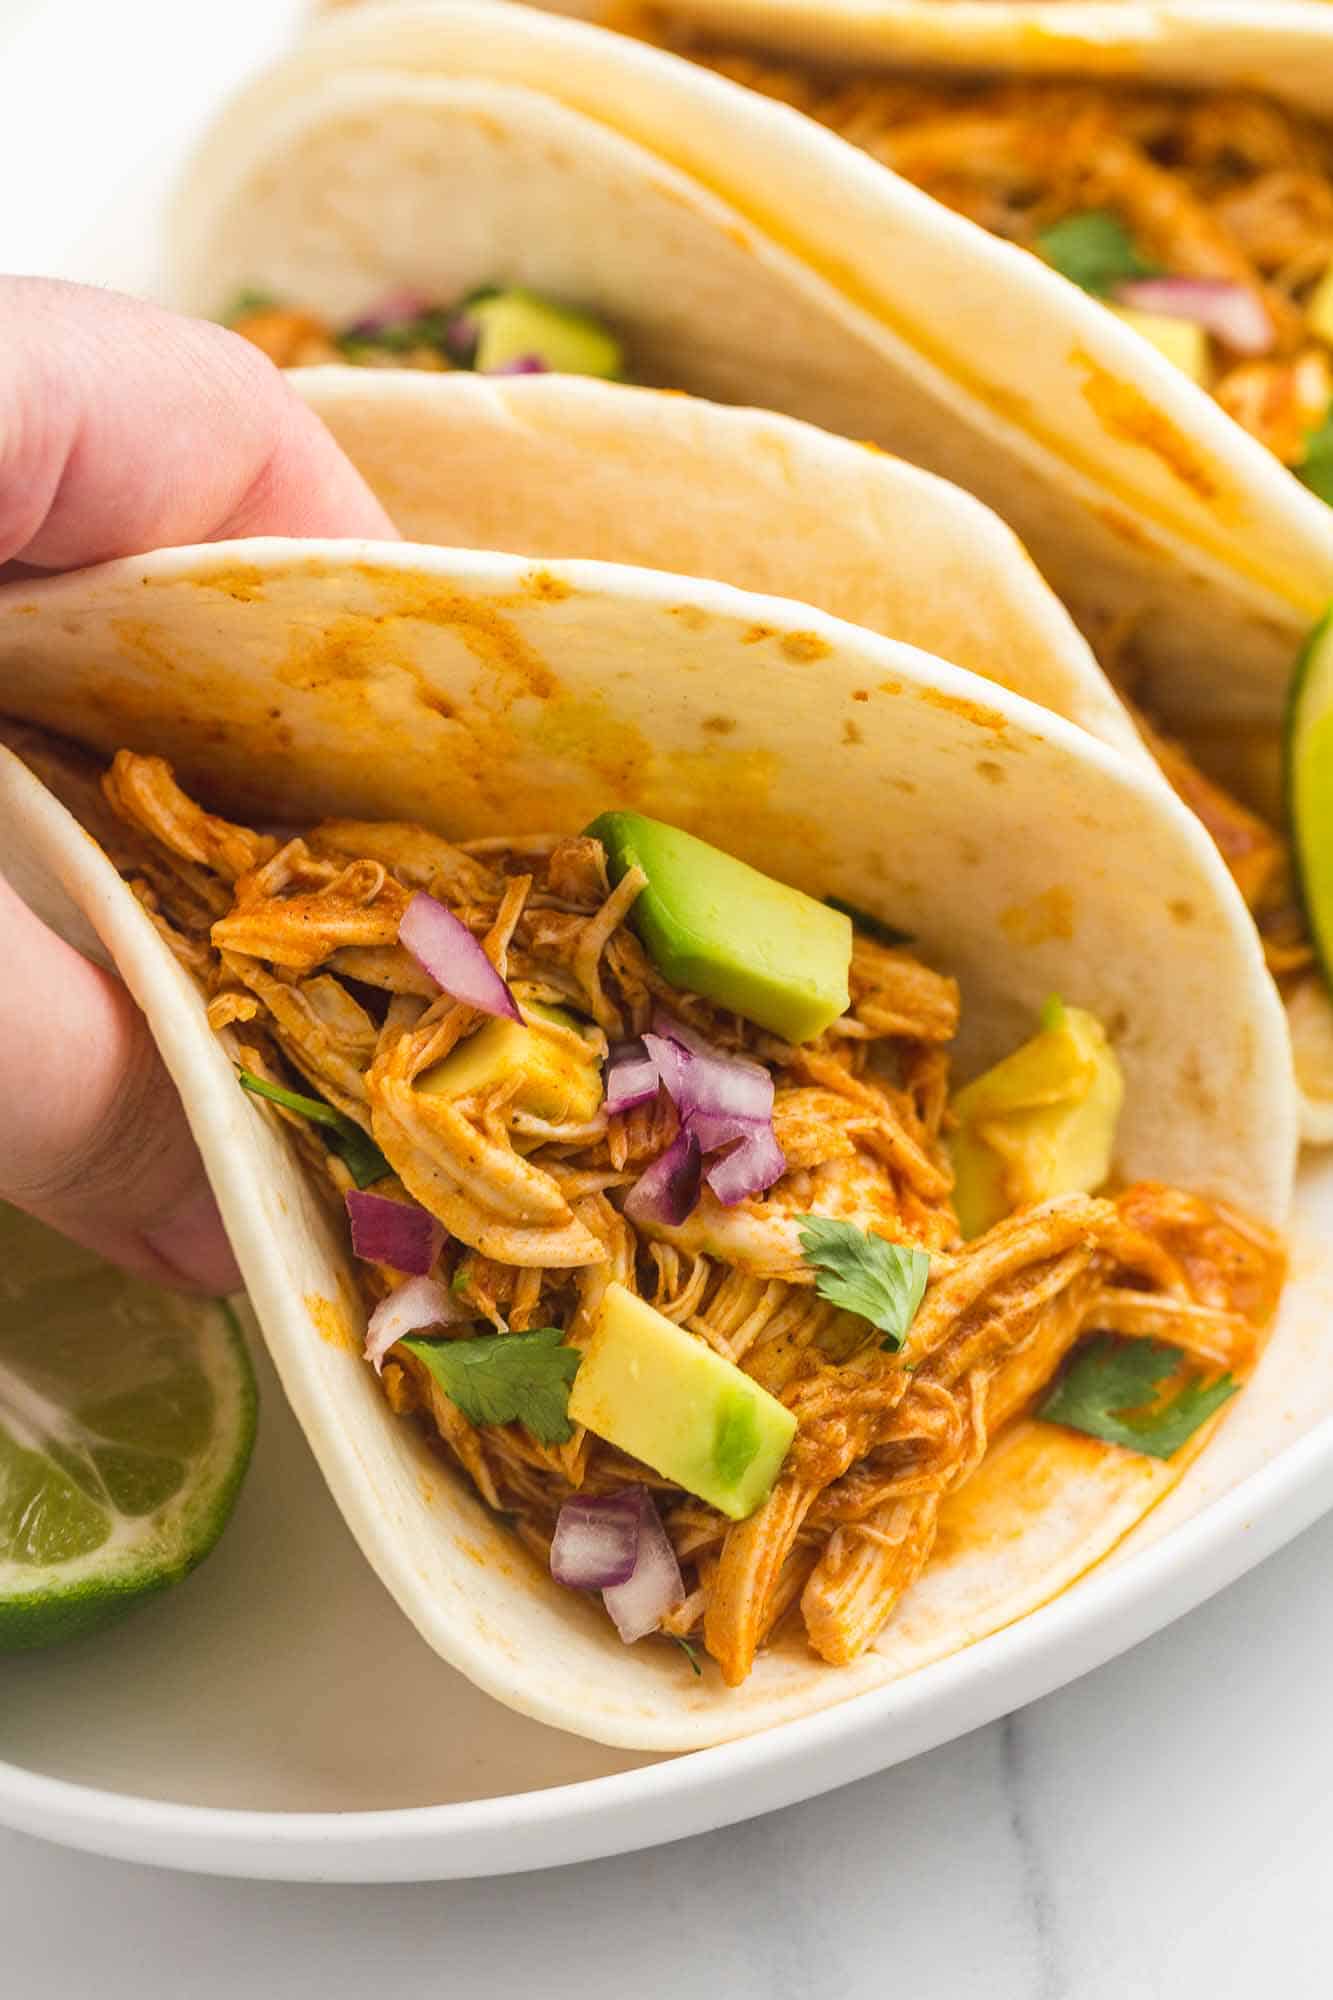 Holding a chicken tinga taco with fresh avocado and finely diced red onion